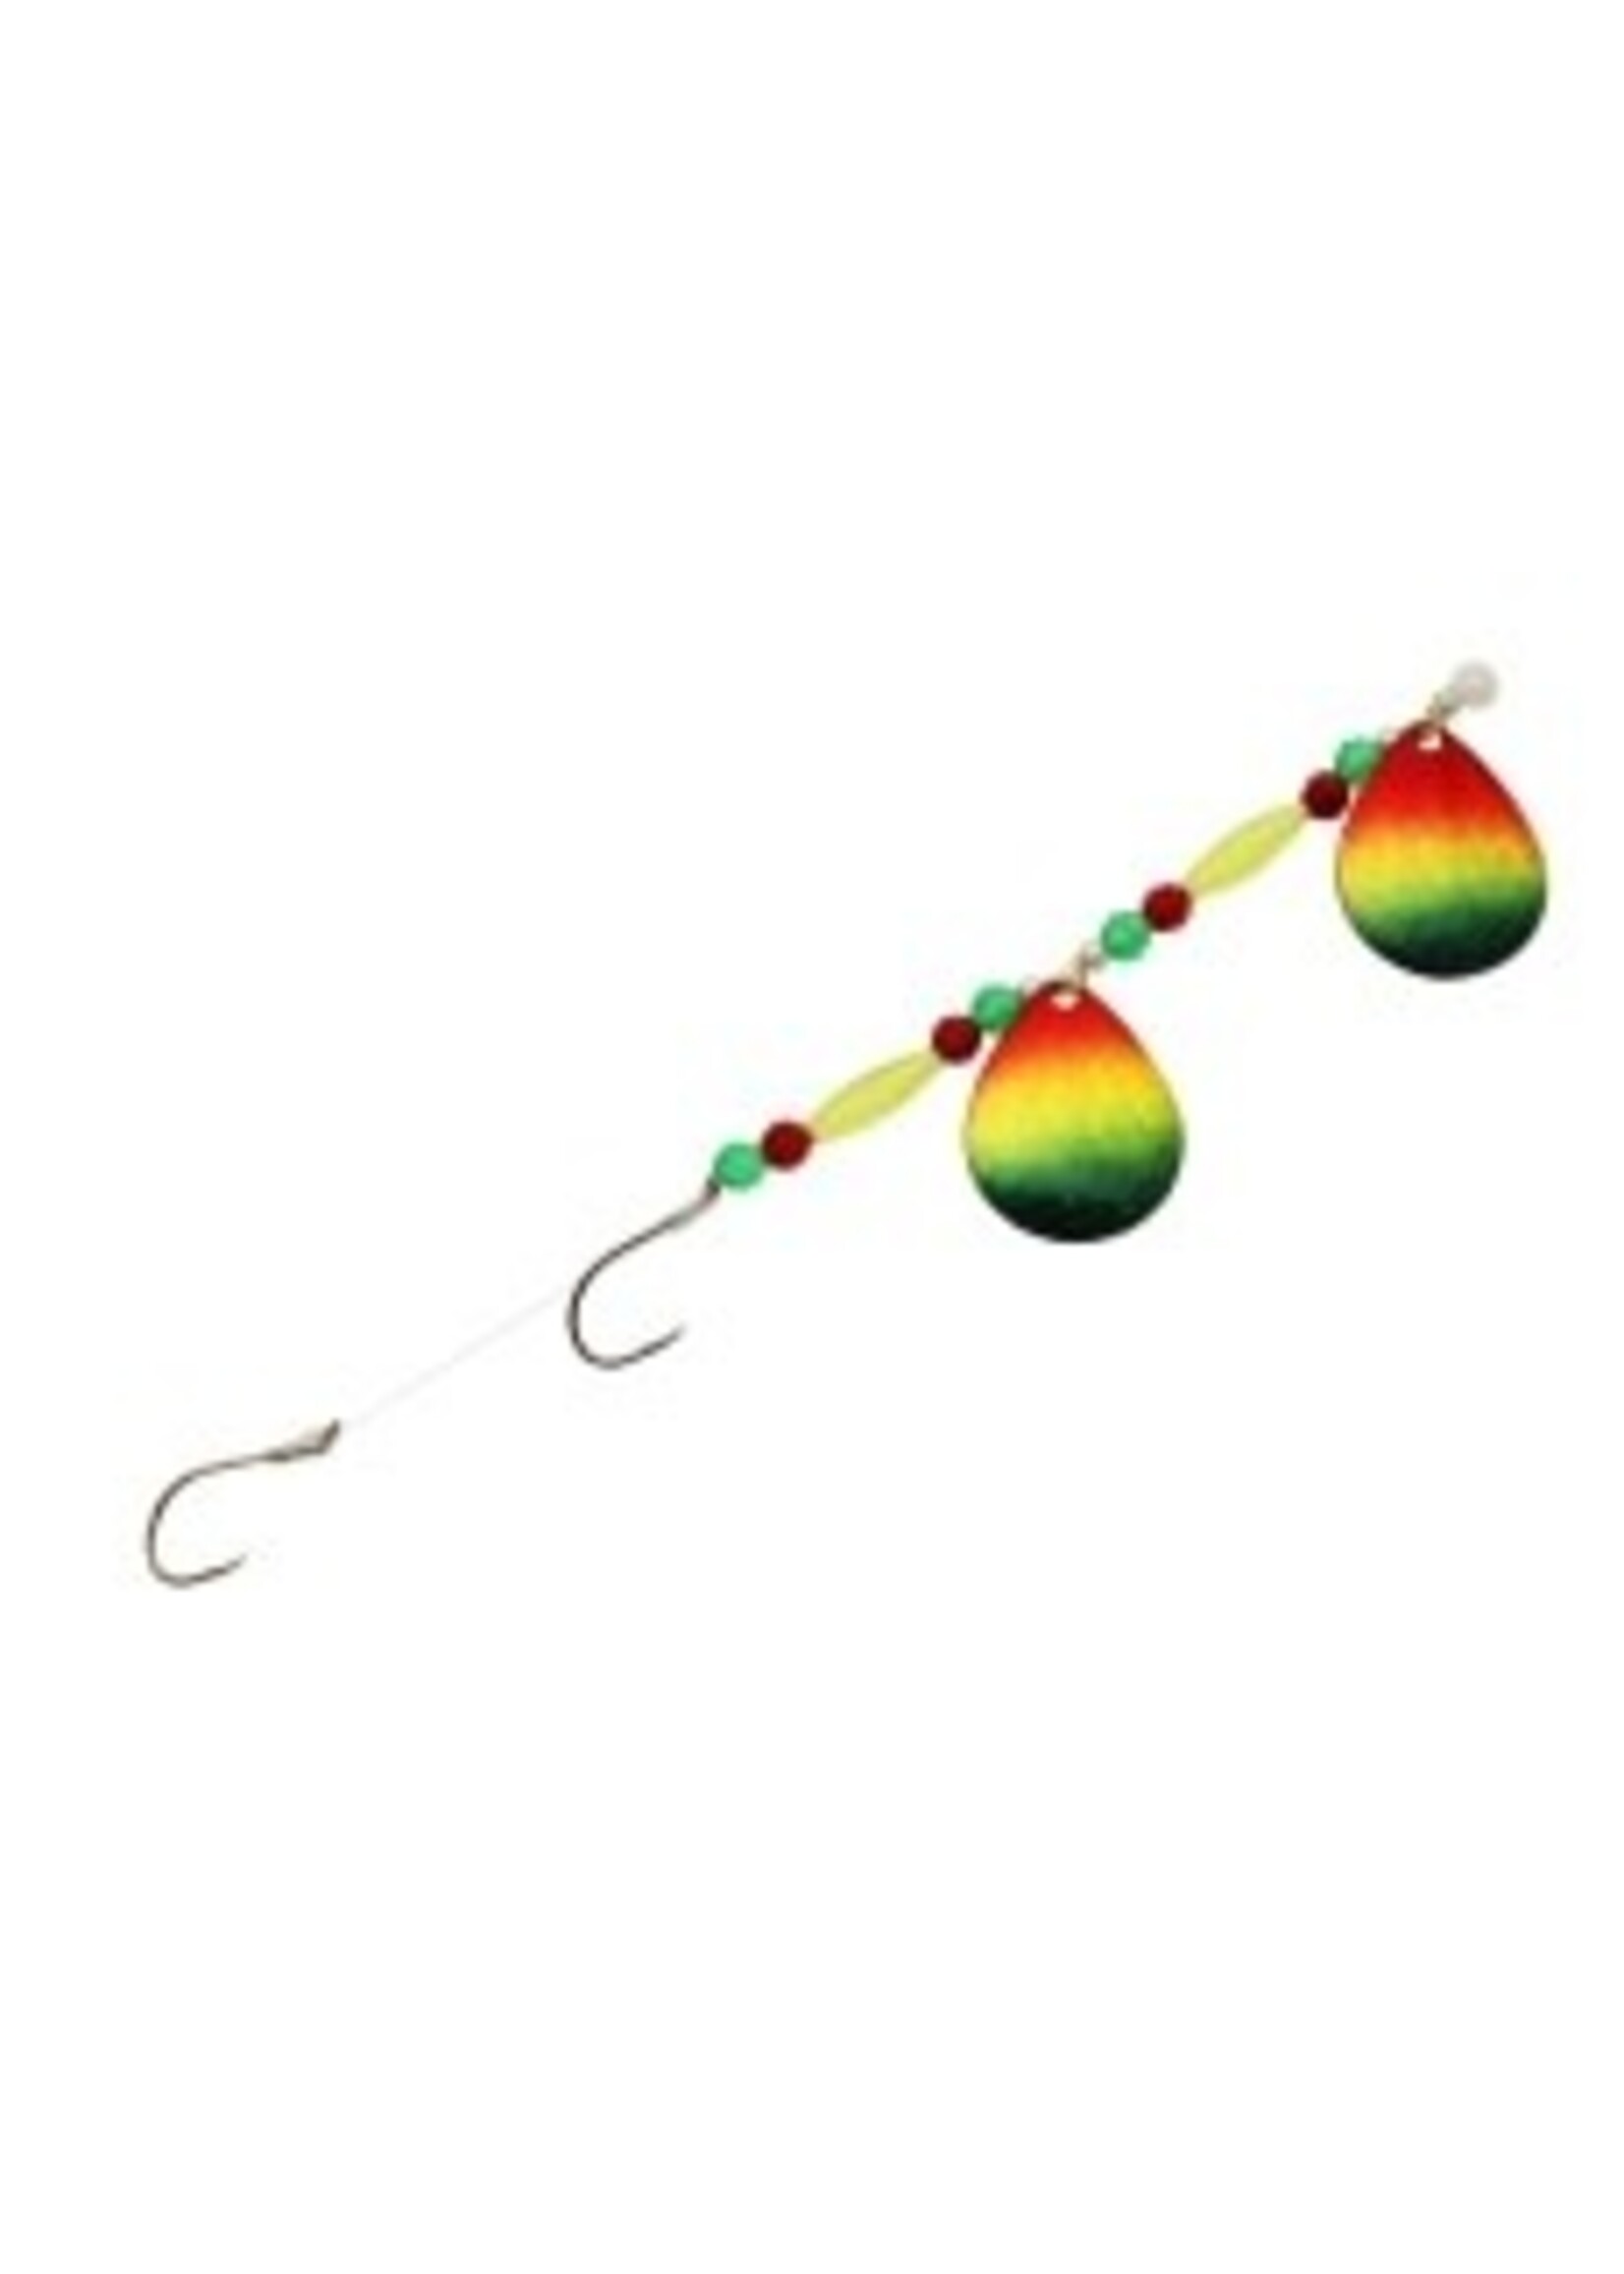 Three D Worm Harnesses - Tackle Shack